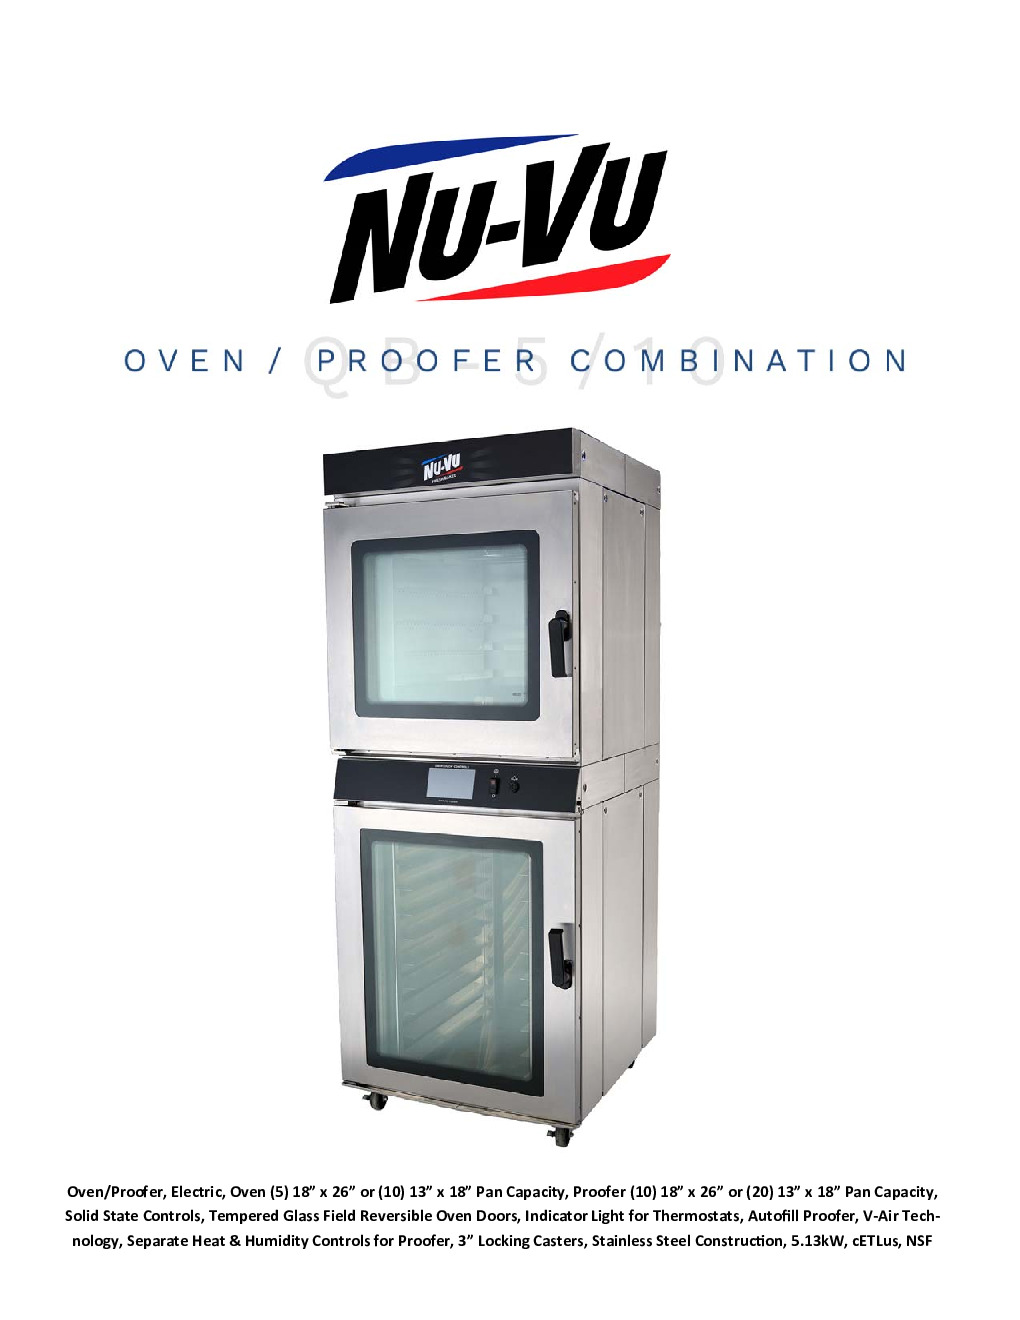 NU-VU QBT-5/10 Electric Convection Oven / Proofer with Touch Screen Controls